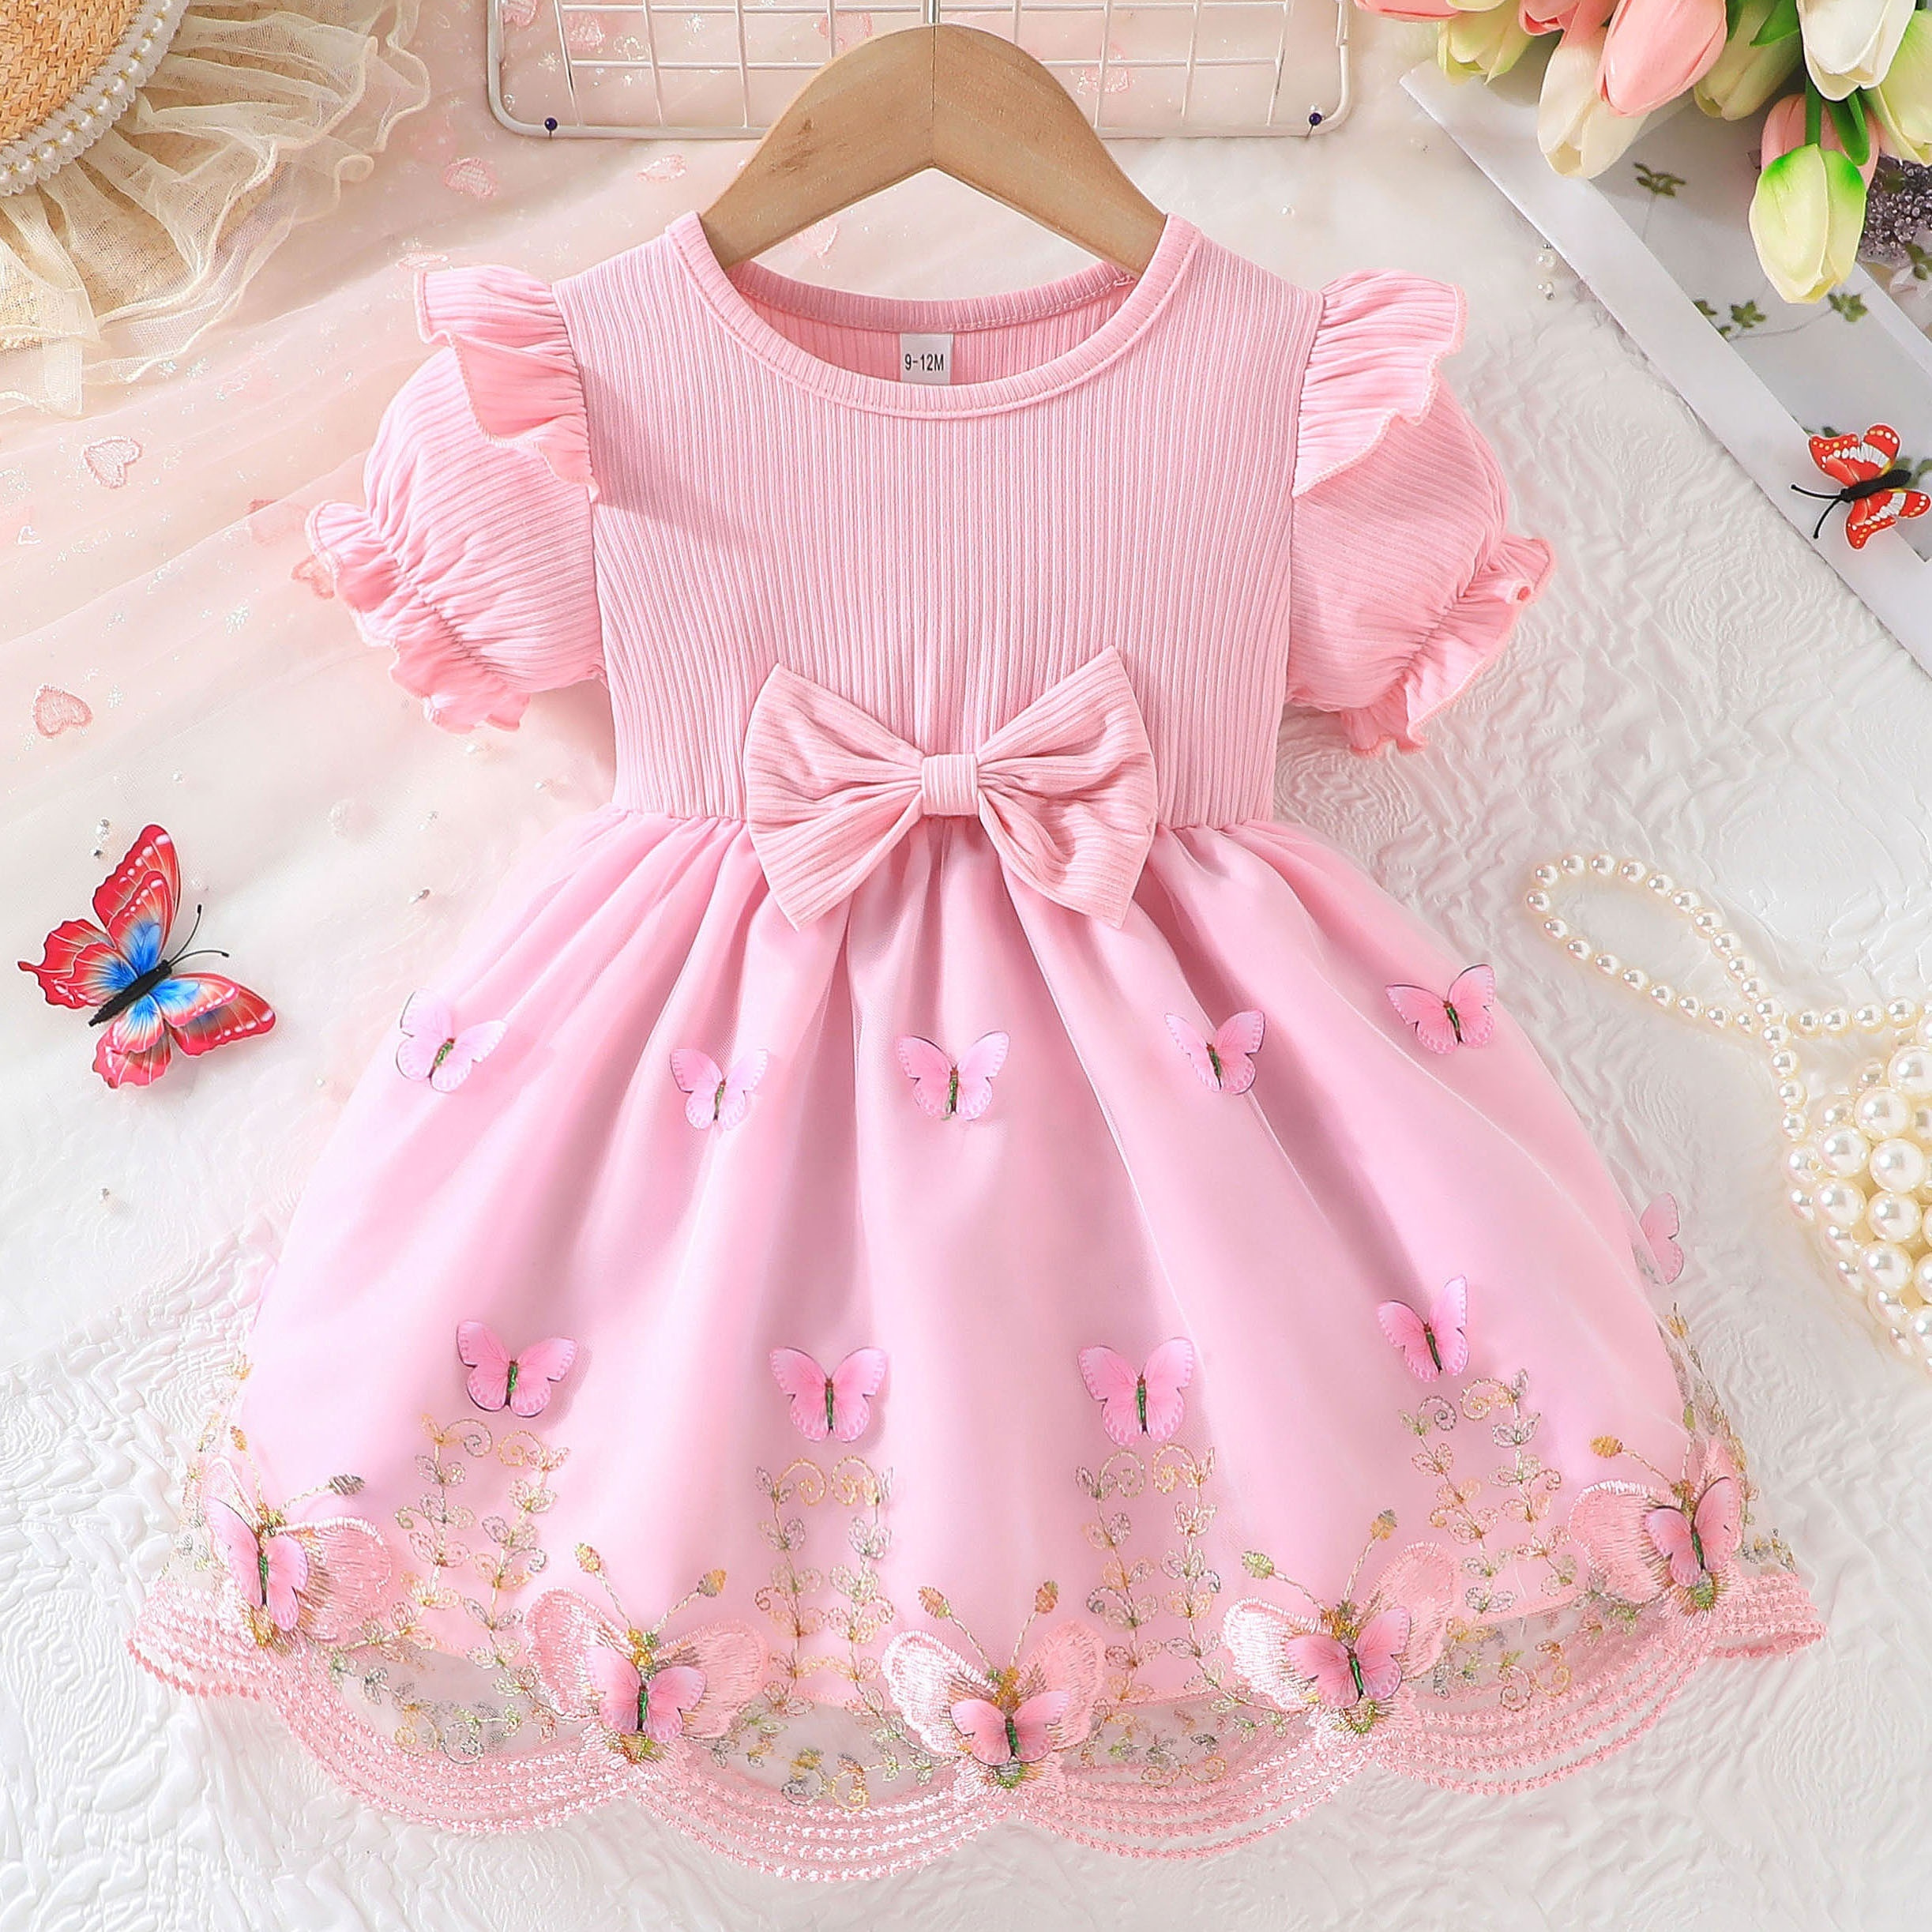 

Baby's Elegant Butterfly Embroidered Mesh Splicing Puff Sleeve Dress, Infant & Toddler Girl's Clothing For Summer/spring, As Gift